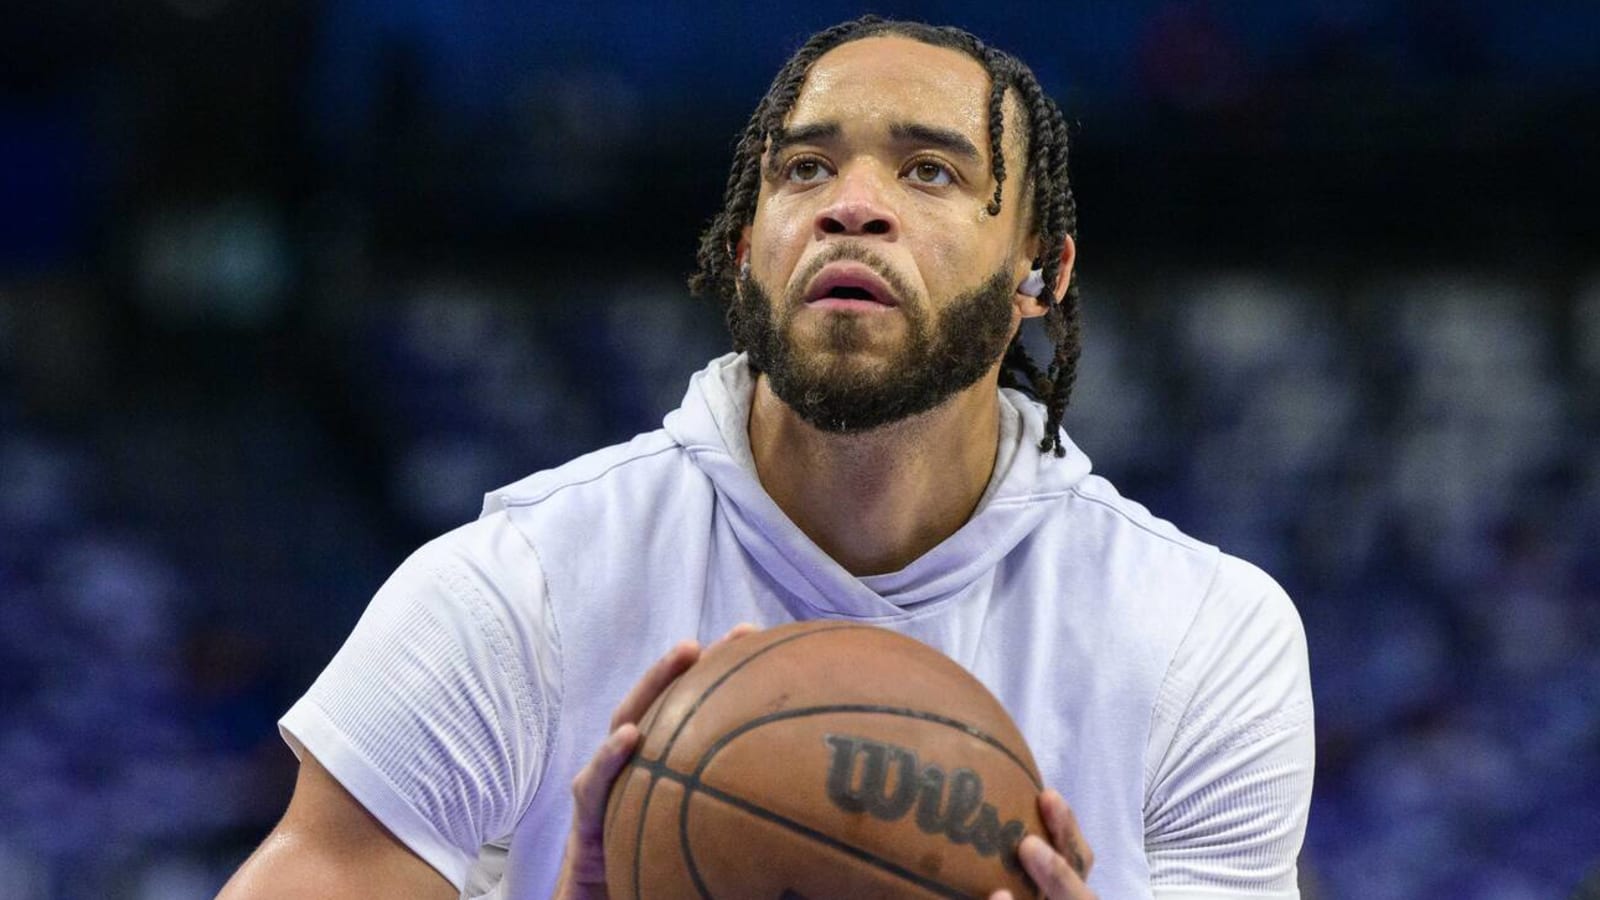 JaVale McGee agrees to three-year deal with Mavericks